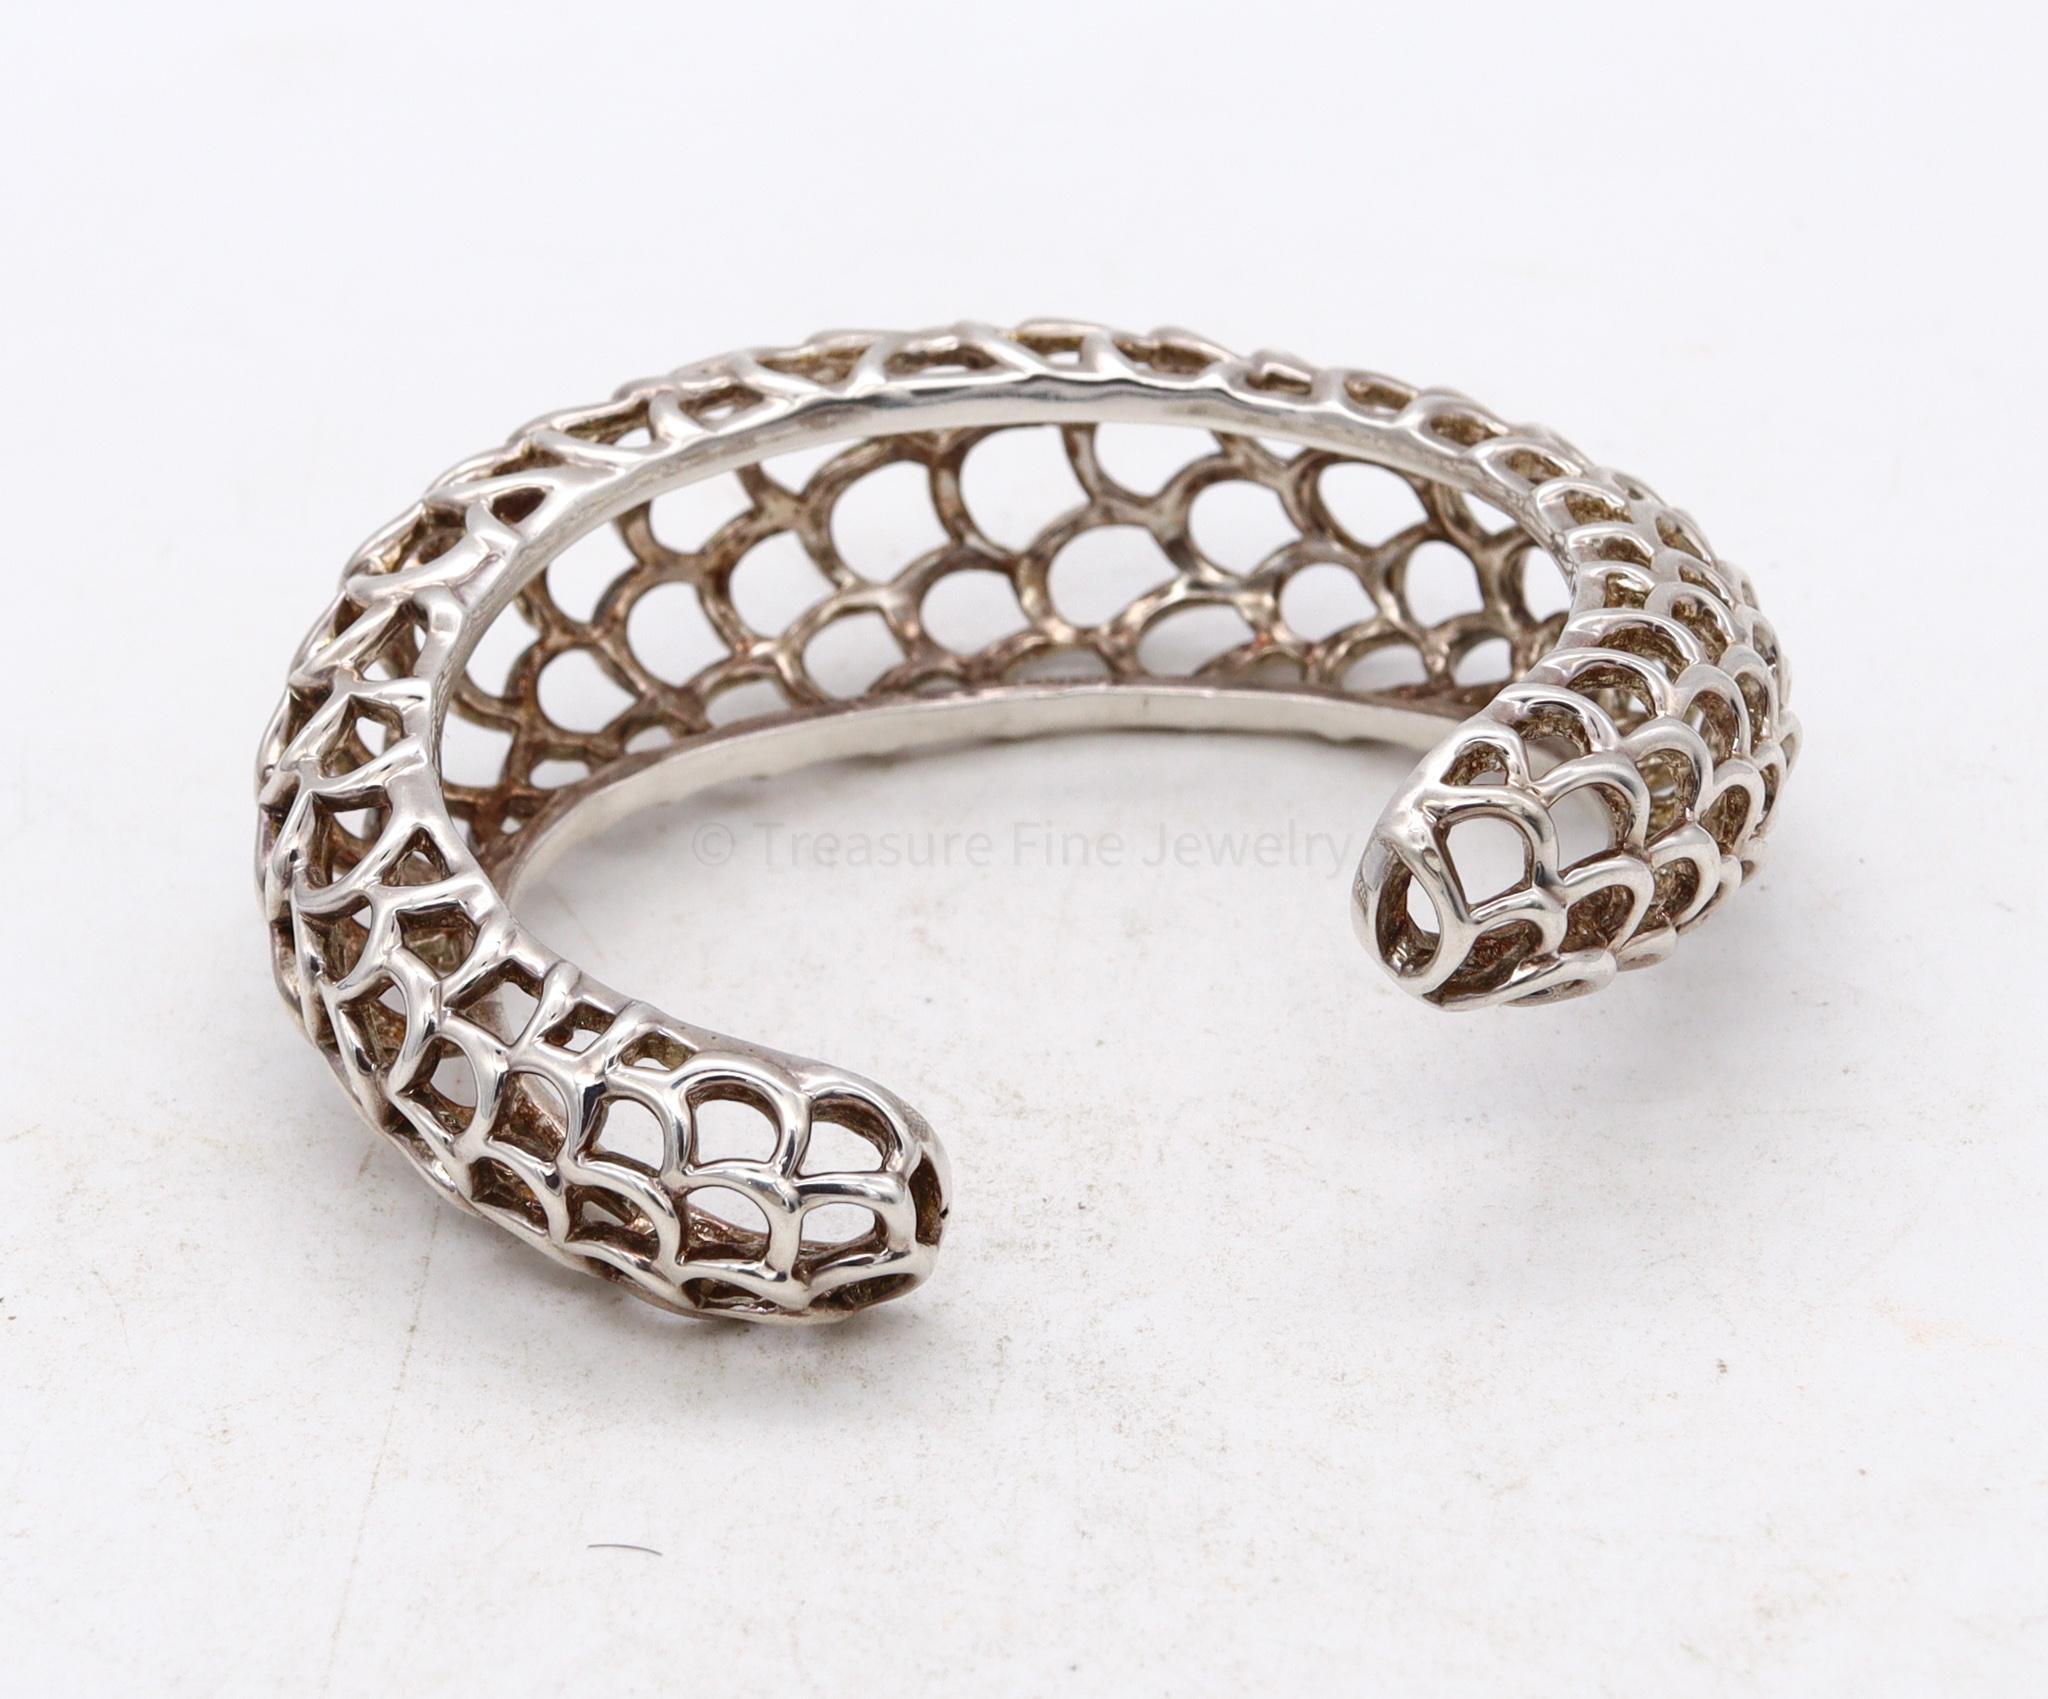 Contemporary Angela Cummings 1991 New York Geometric Honeycomb Cuff in 925 Sterling Silver